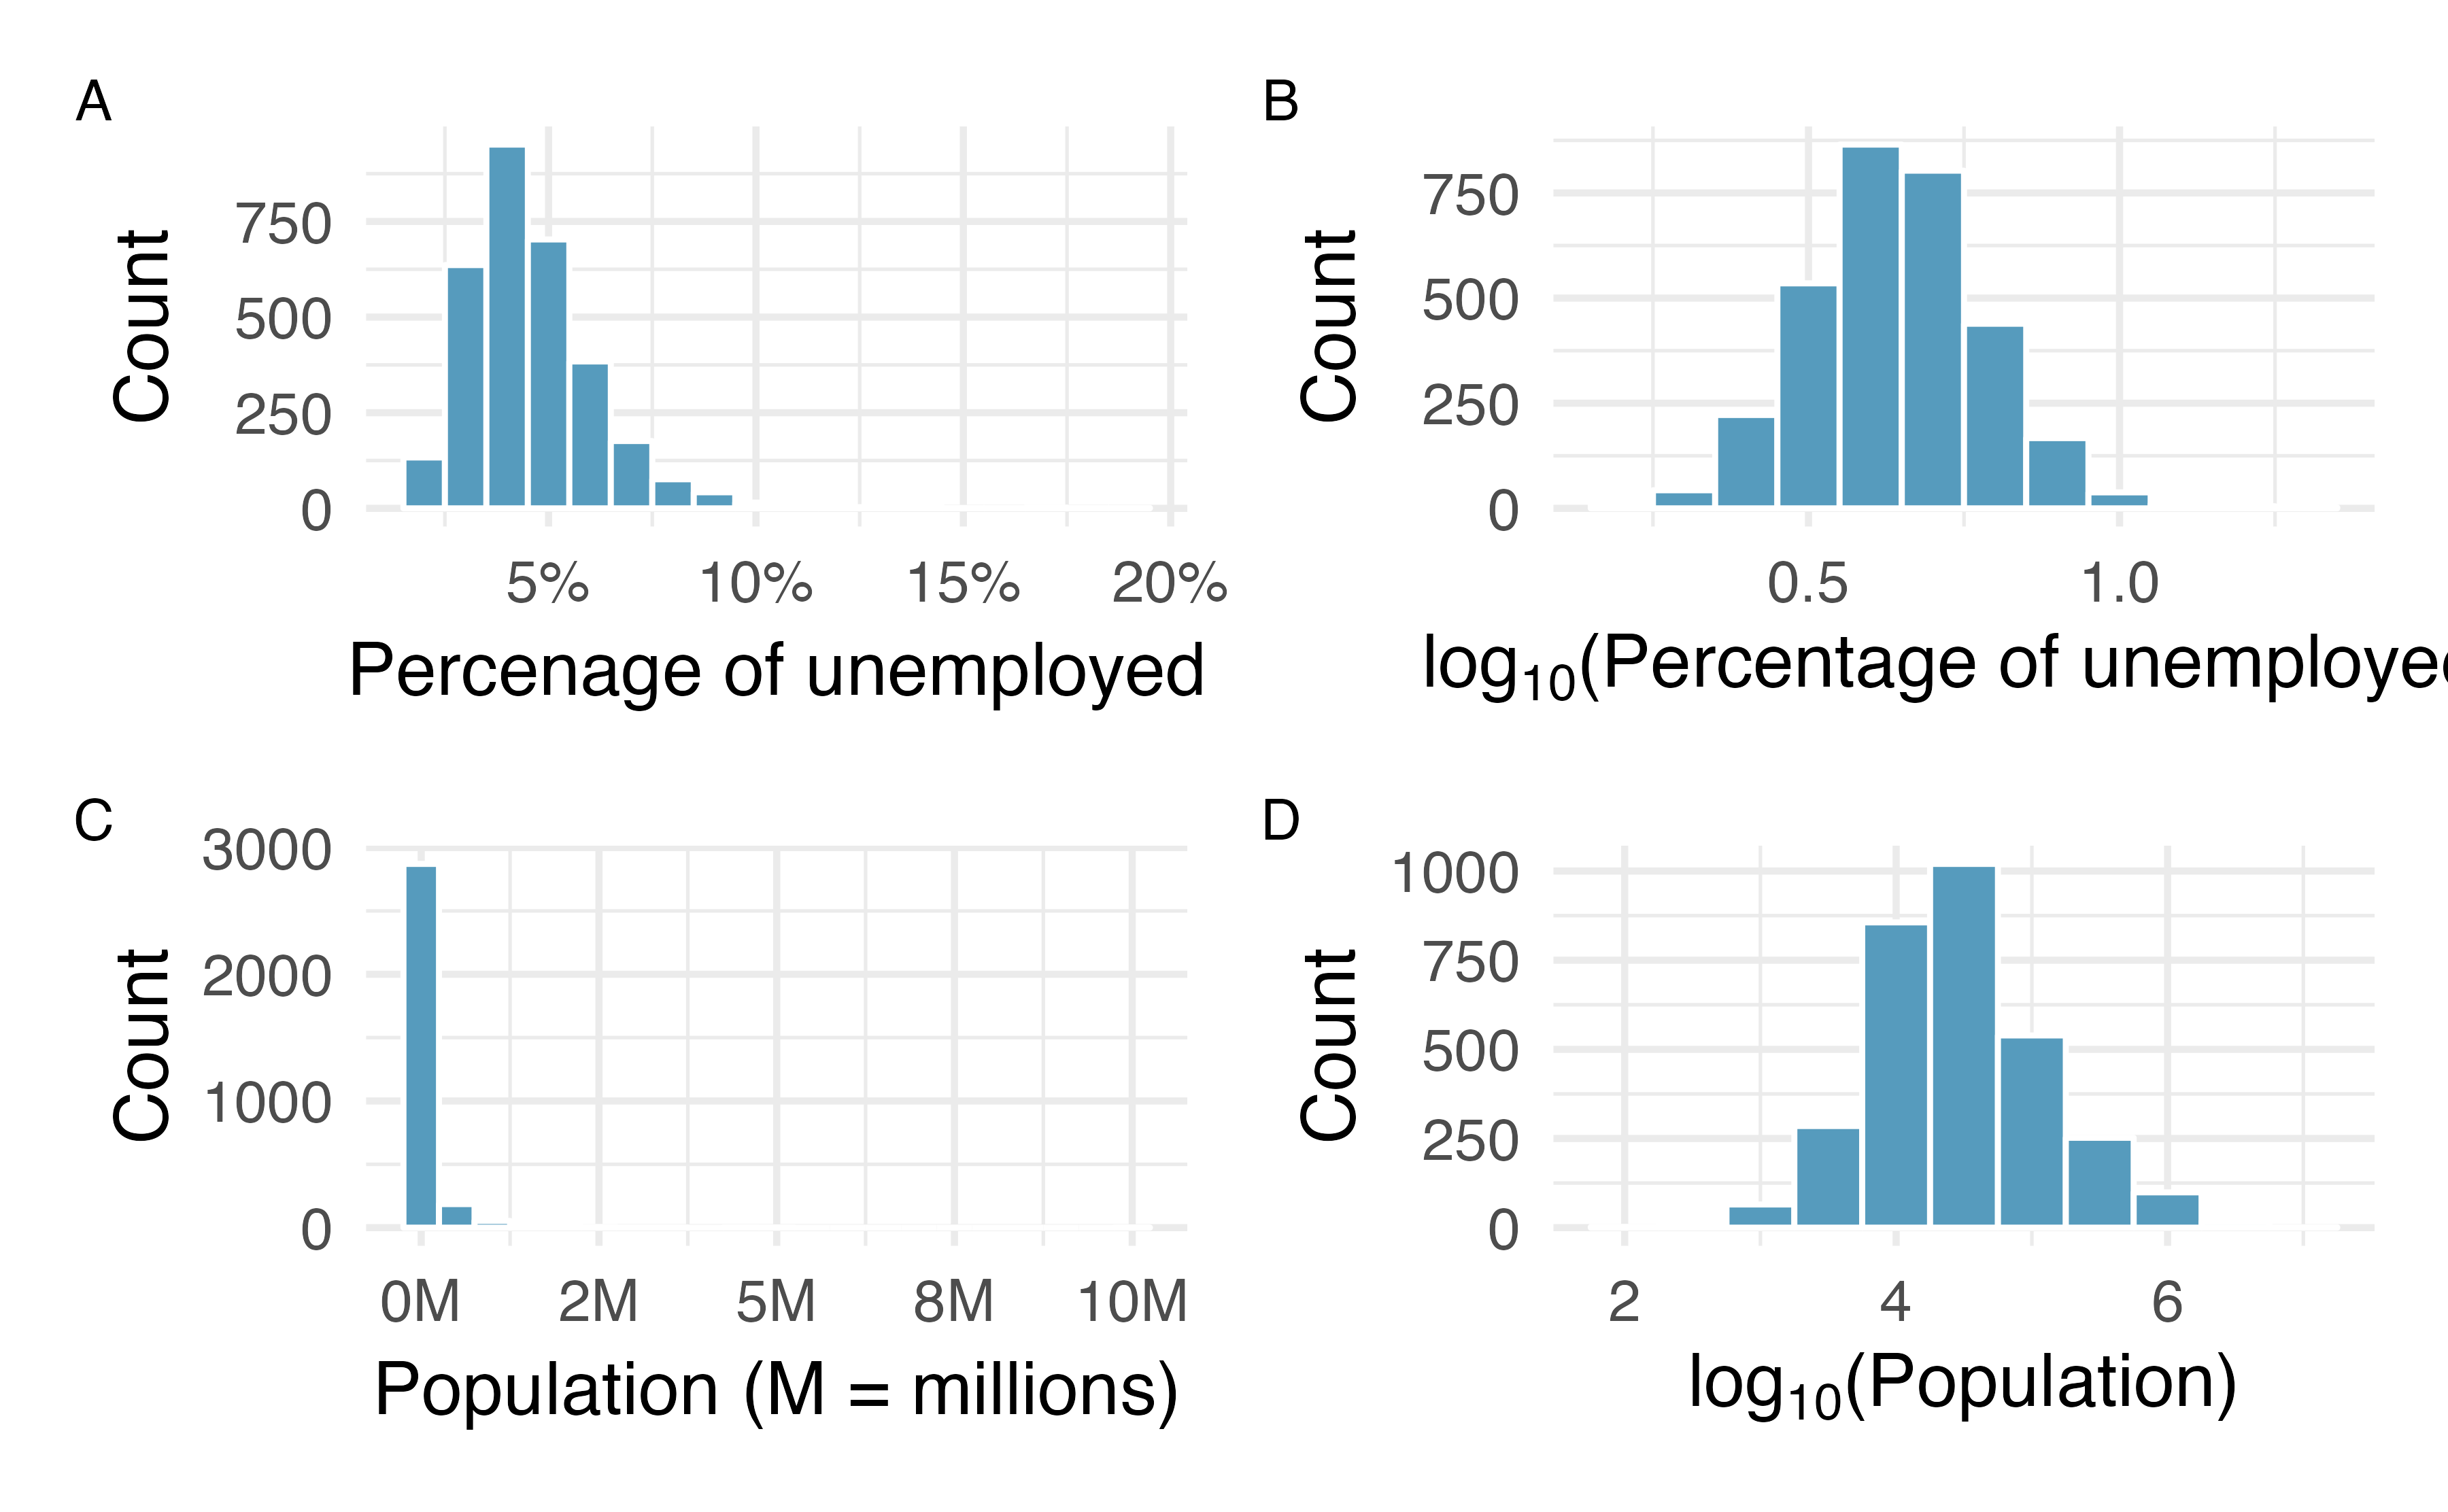 Plot A: A histogram of the percentage of unemployed in all US counties. Plot B: A histogram of log$_{10}$-transformed unemployed percentages. Plot C: A histogram of population in all US counties. Plot D: A histogram of log$_{10}$-transformed populations. For Plots B and D, the x-value corresponds to the power of 10, e.g., 1 on the x-axis corresponds to $10^1 =$ 10 and 5 on the x-axis corresponds to $10^5 =$ 100,000. Data are from 2017.